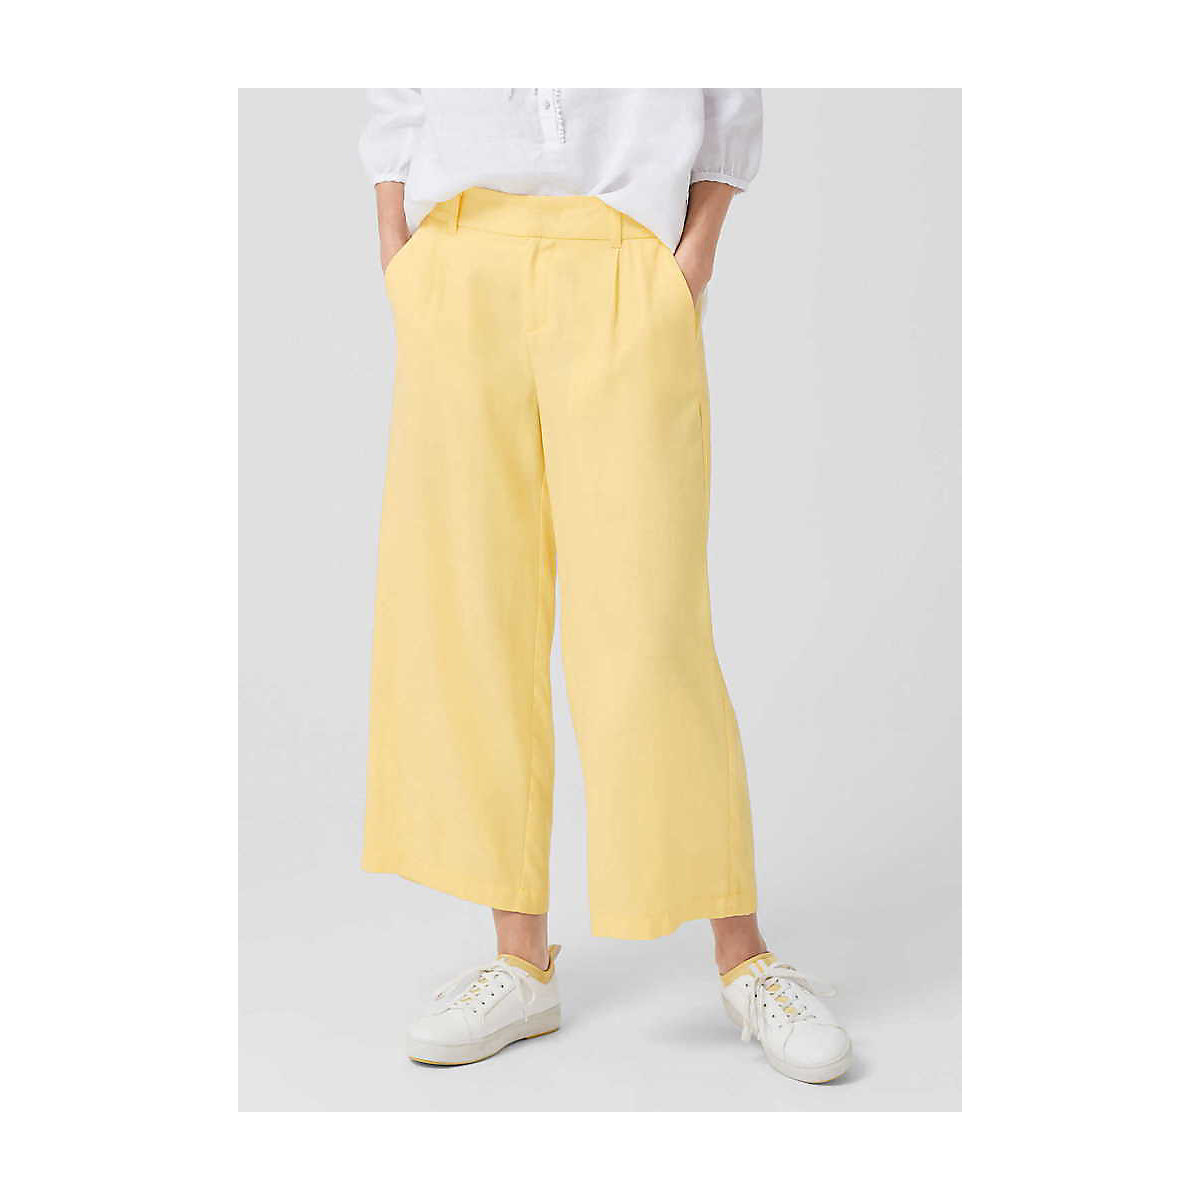 s.Oliver Culottes gelb